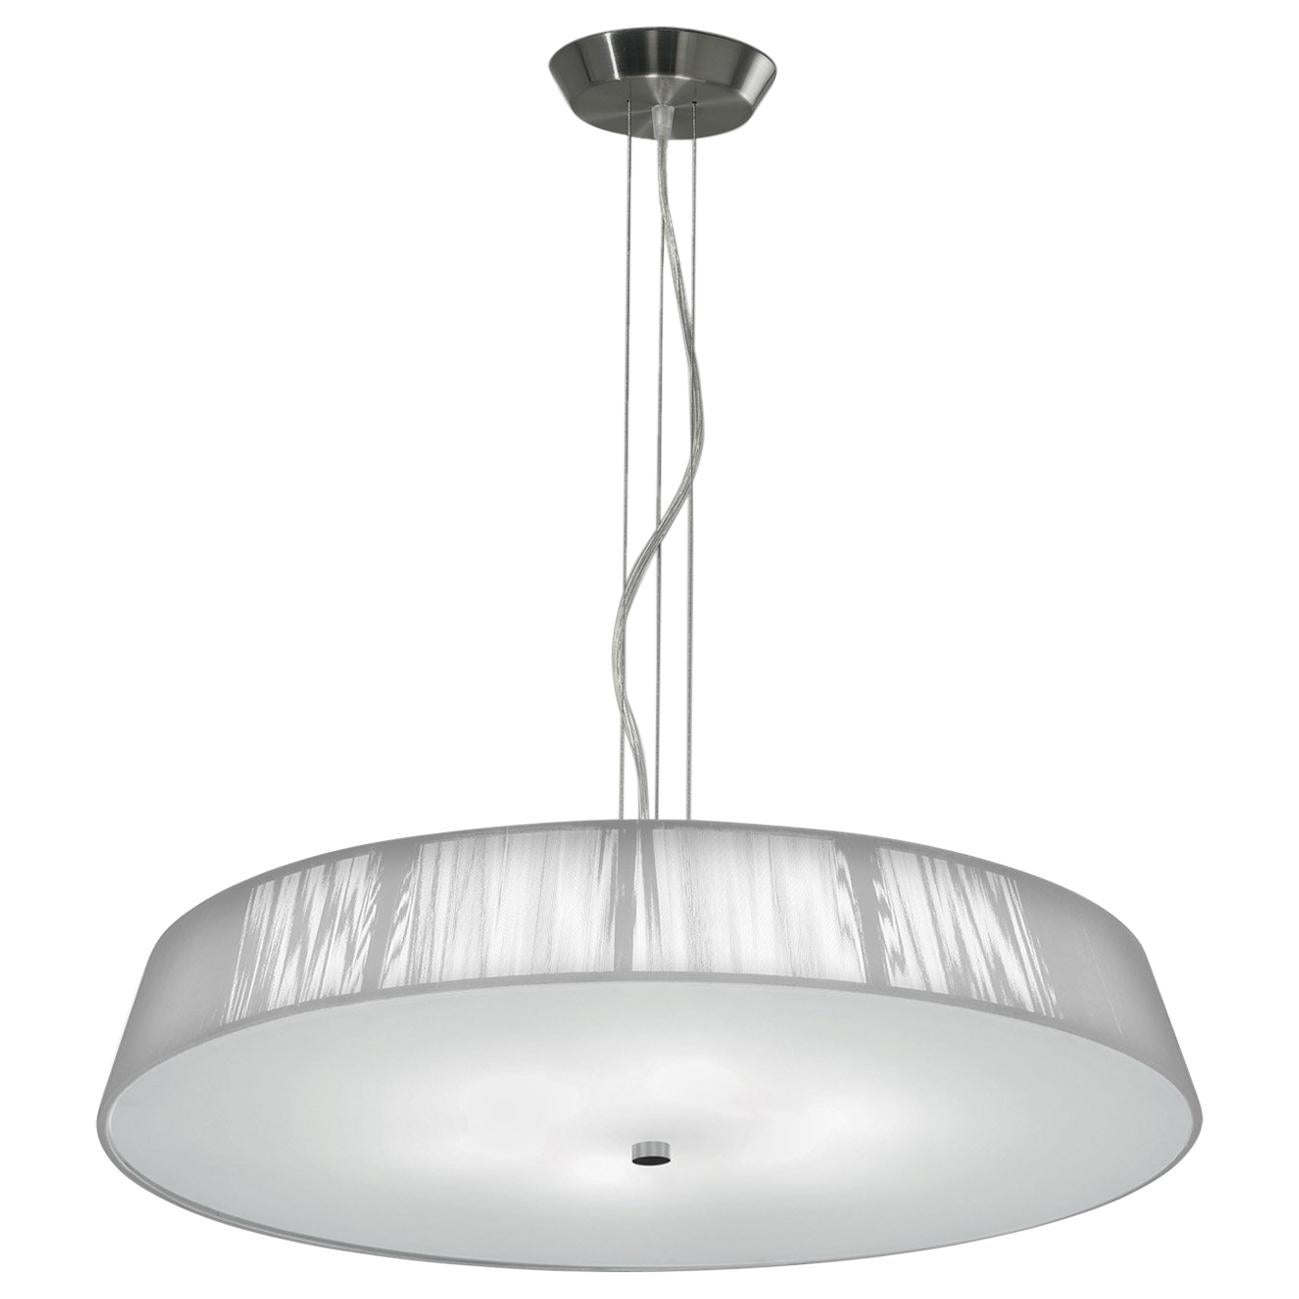 Leucos Lilith S 70 Pendant Light in White and Brushed Nickel by Design Lab